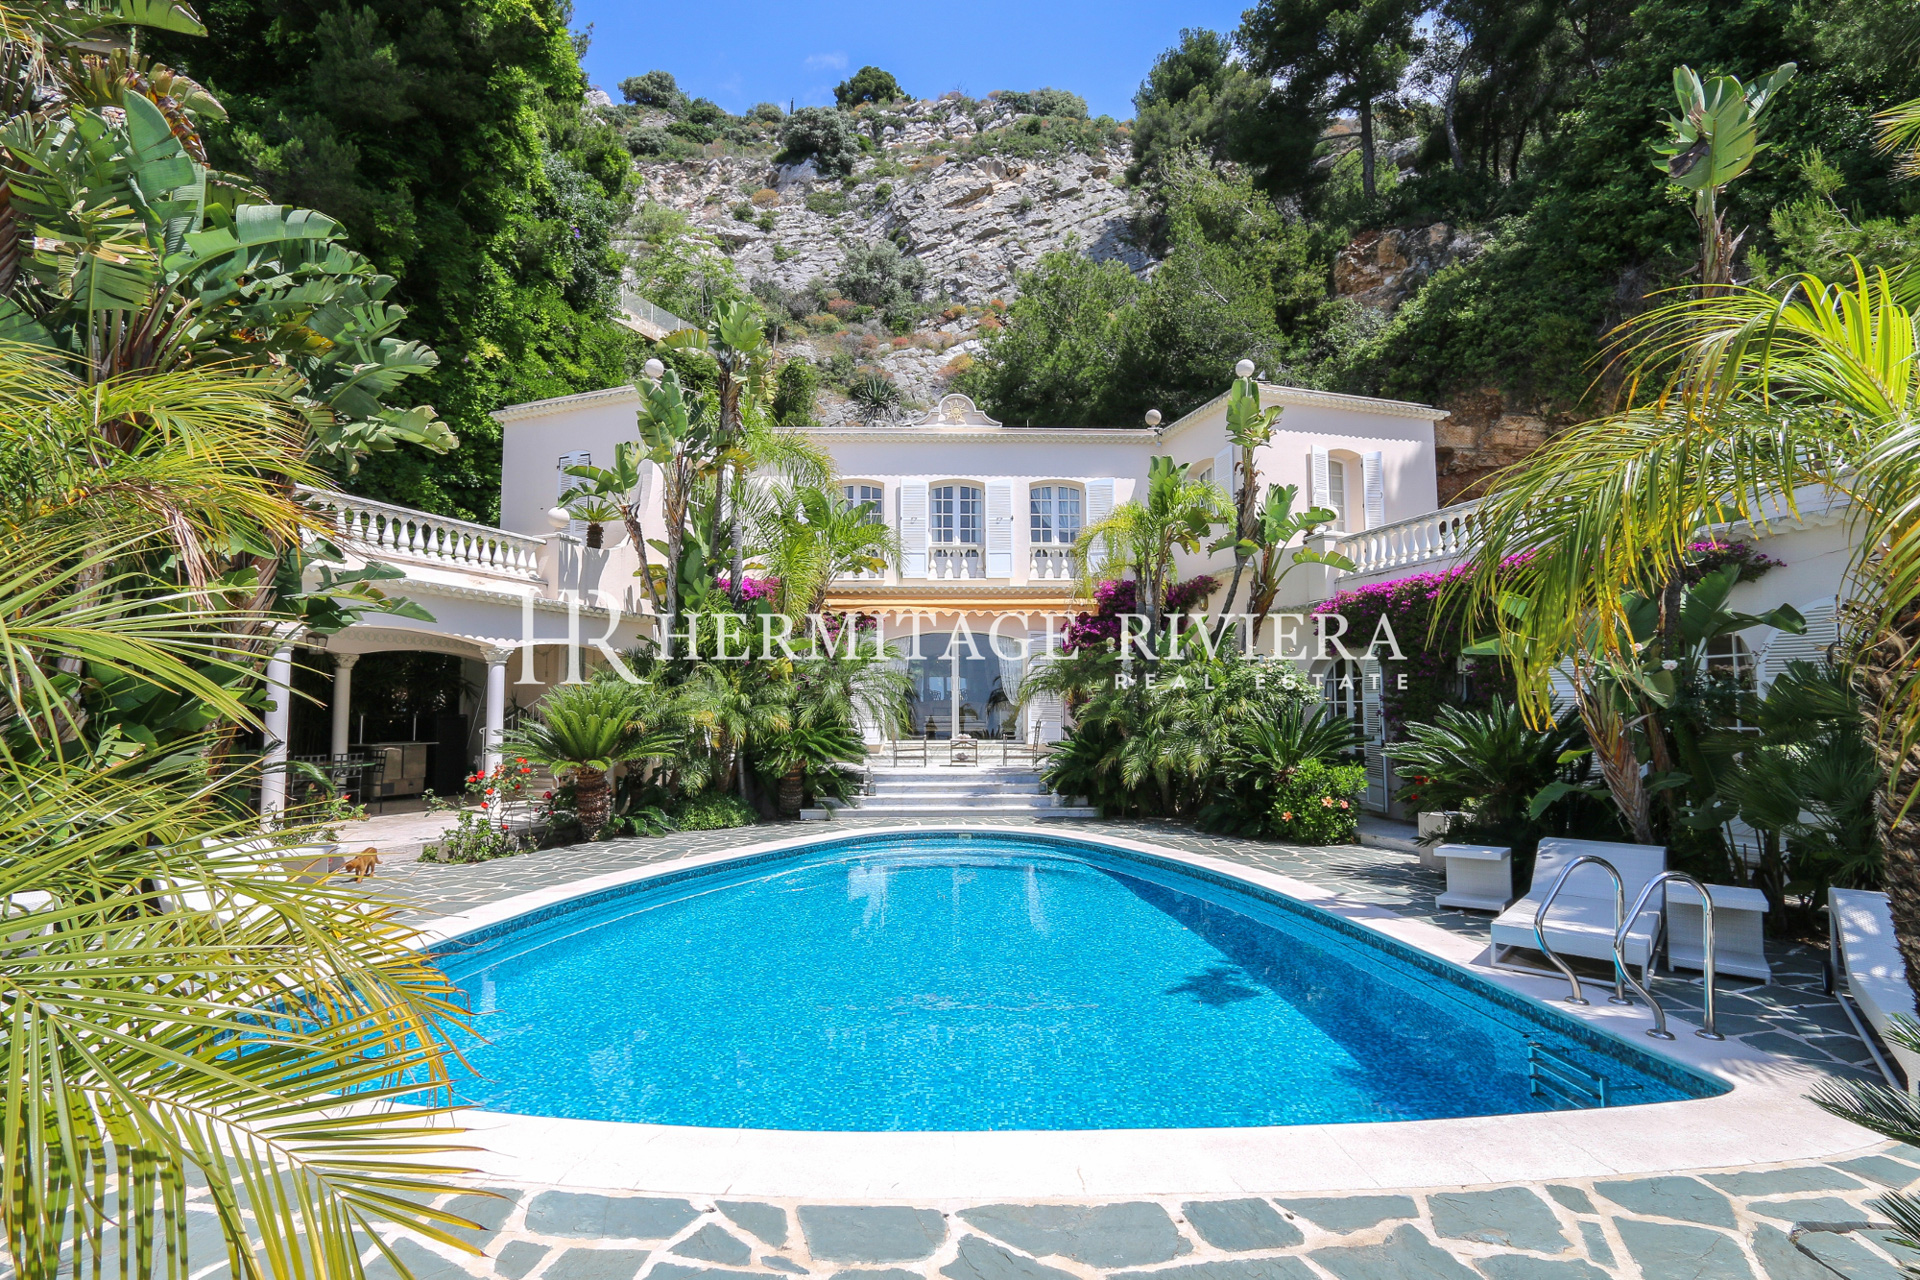 Property close Monaco with panoramic view (image 1)